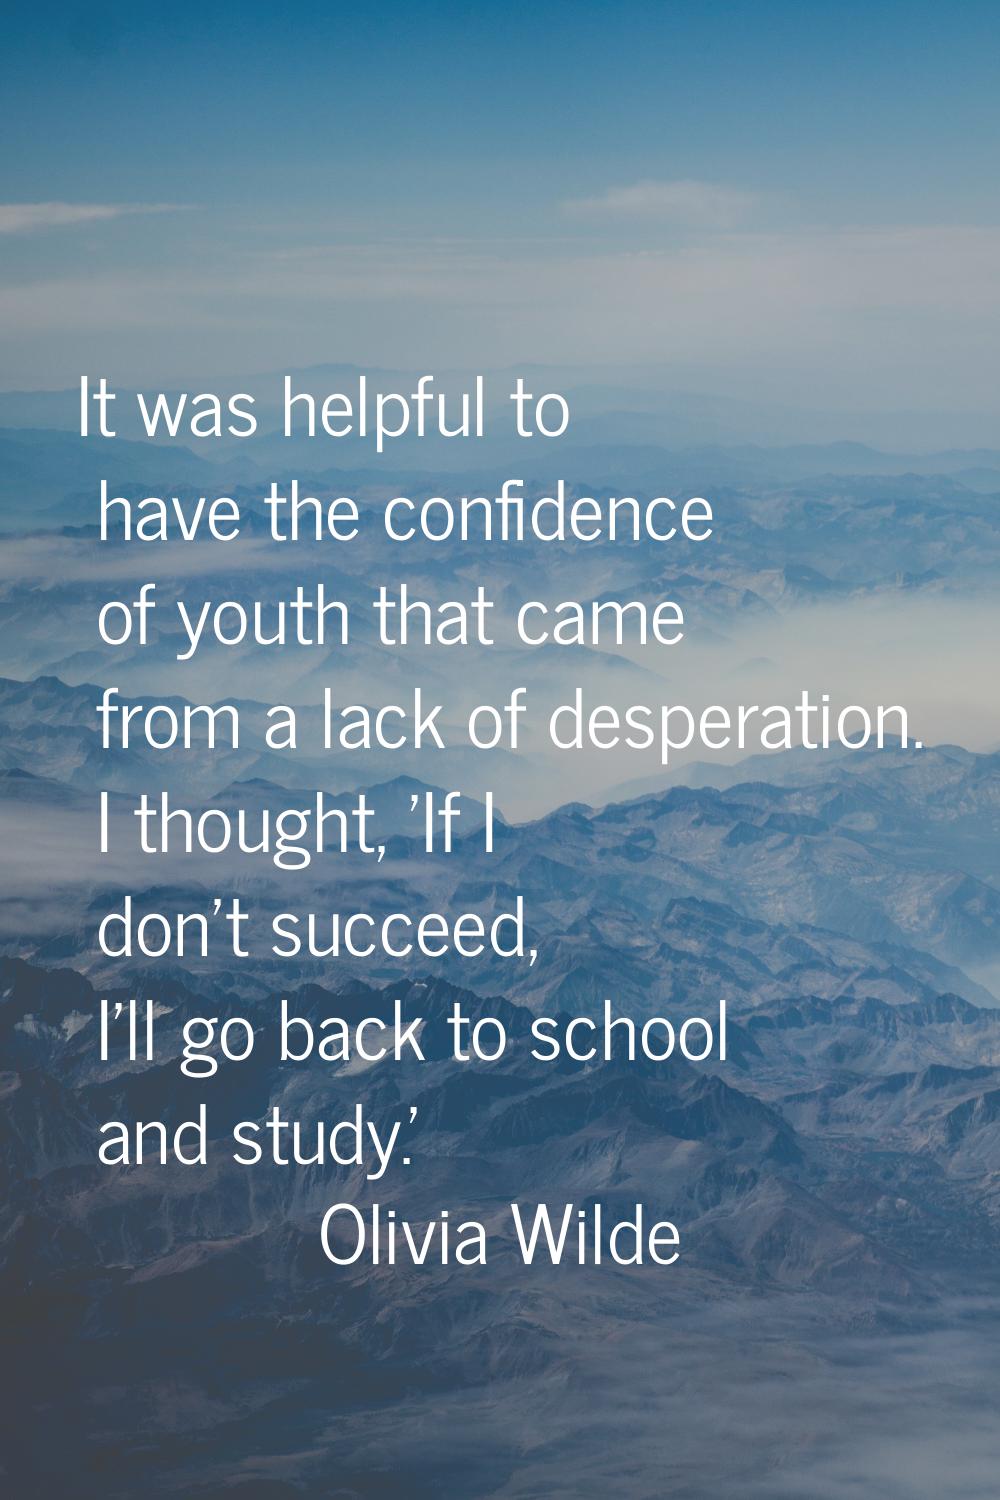 It was helpful to have the confidence of youth that came from a lack of desperation. I thought, 'If